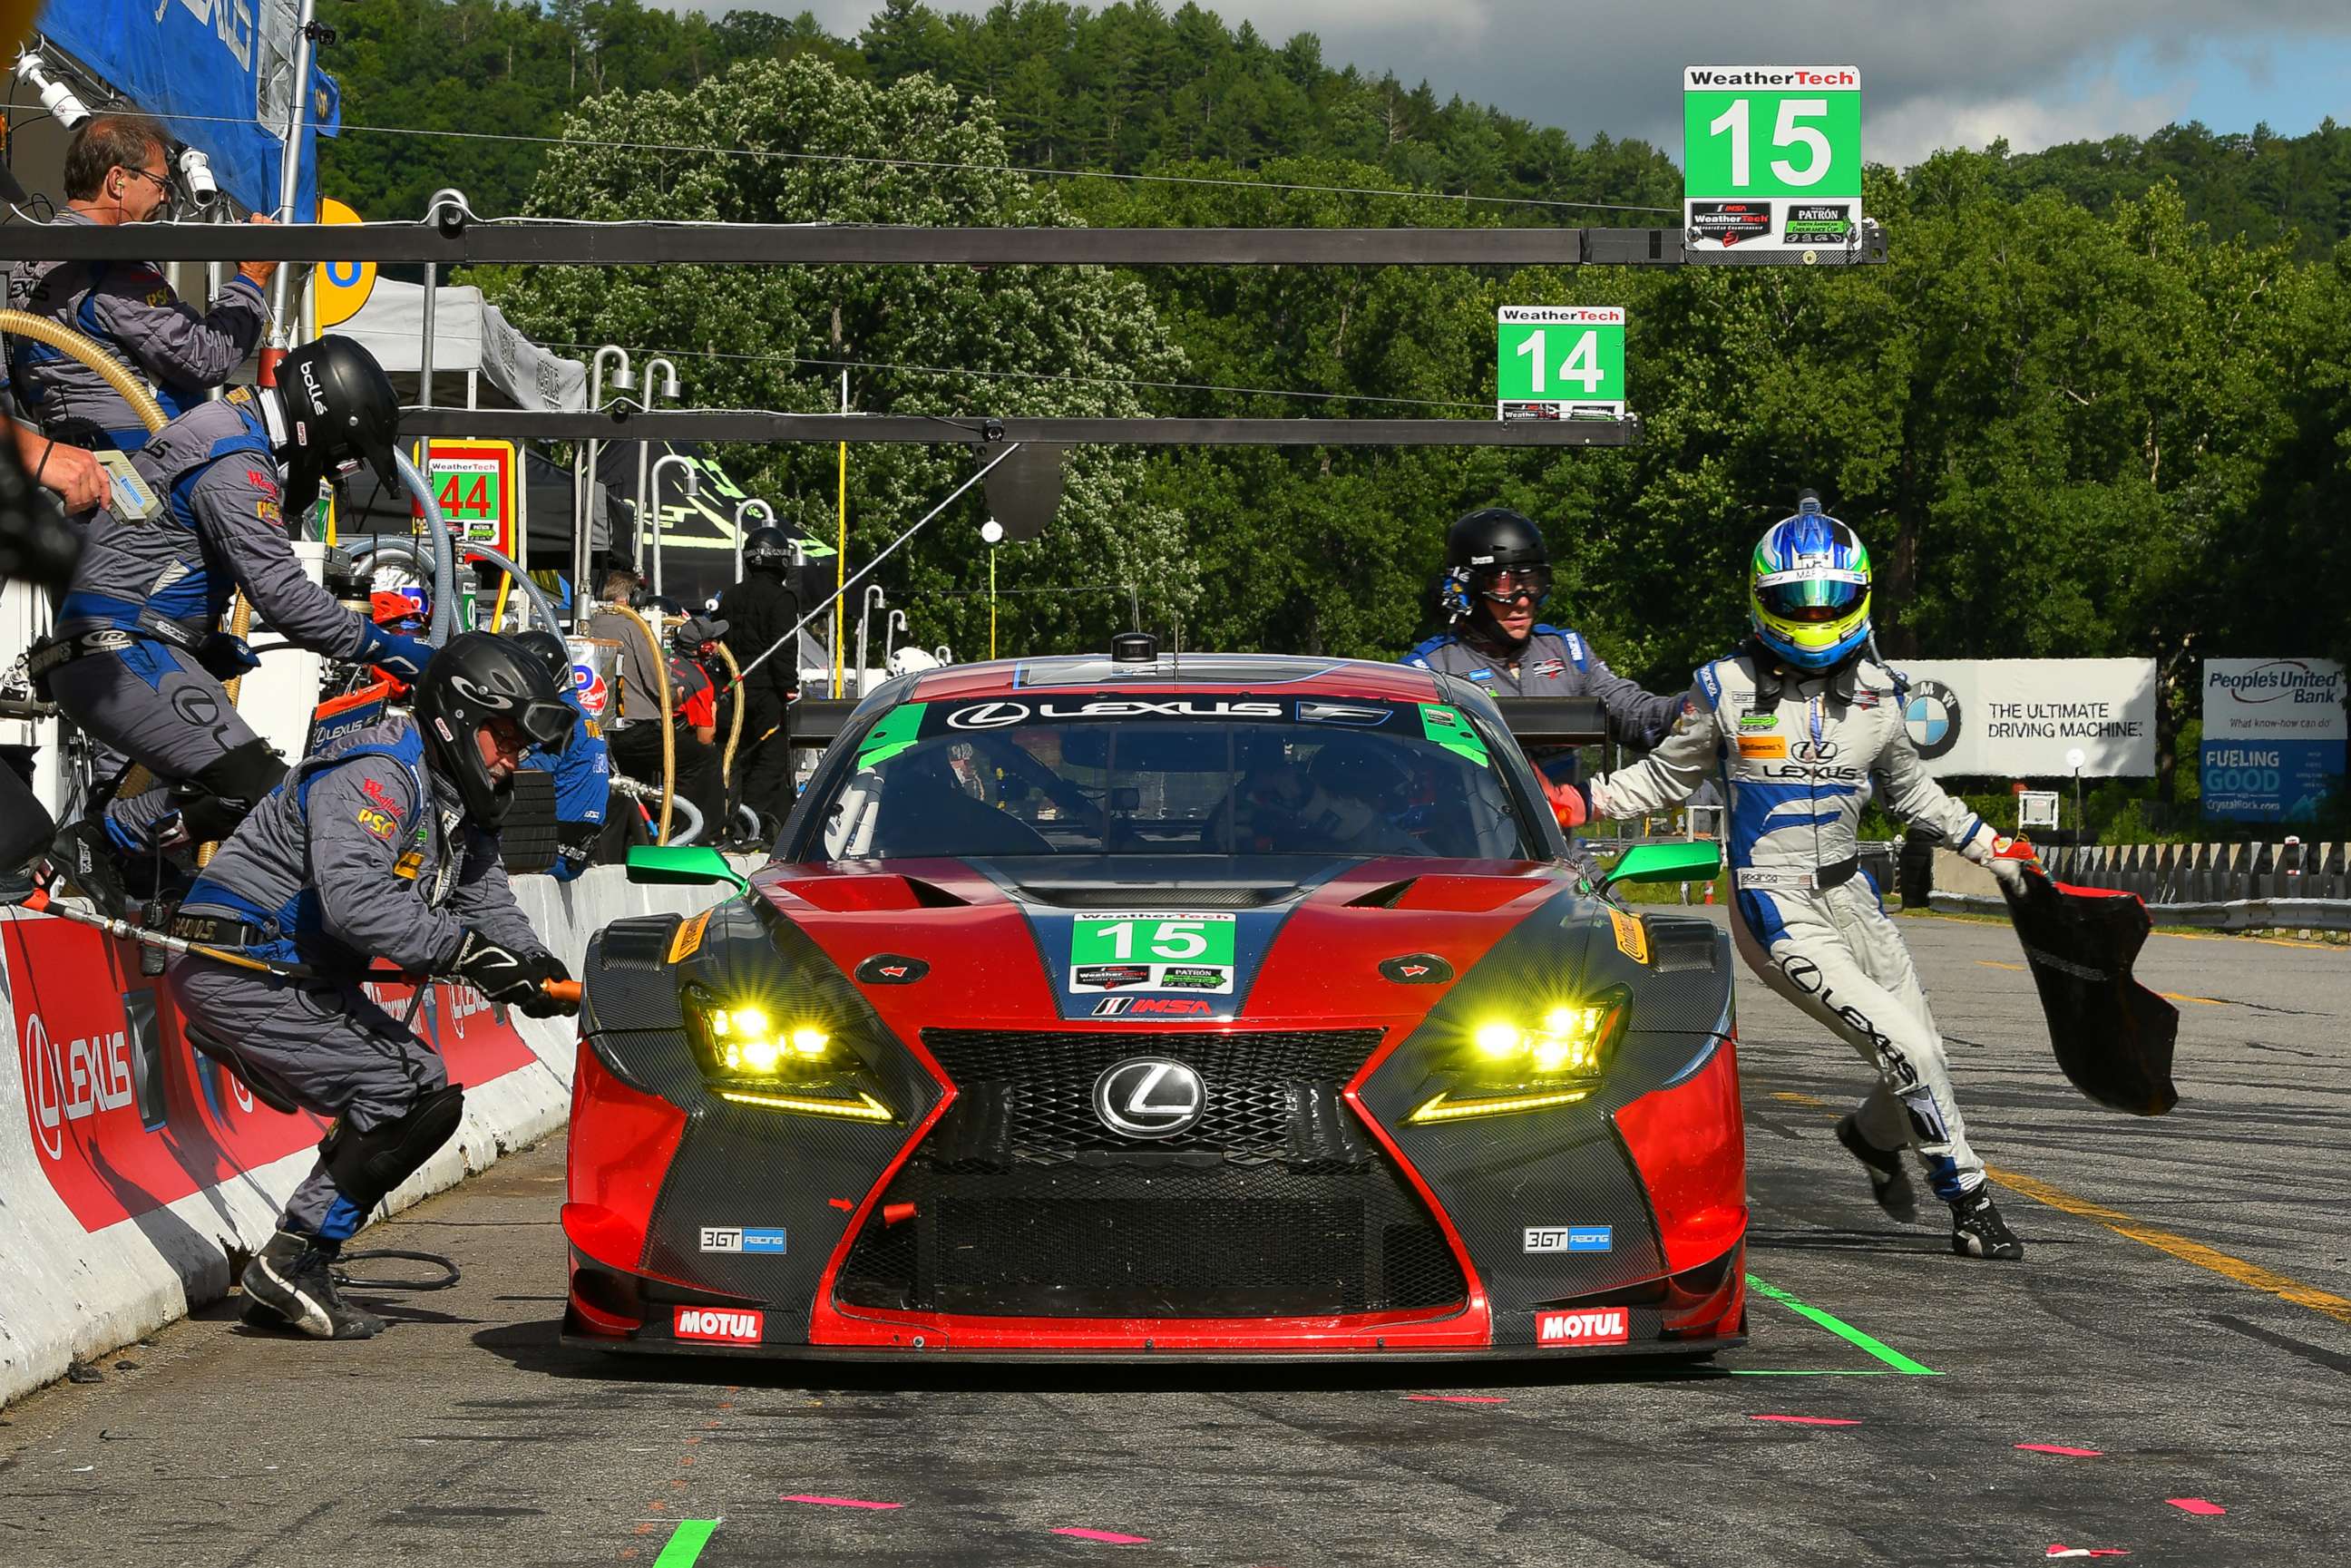 PHOTO: A pit stop at the Lime Rock Park race circuit in Connecticut.